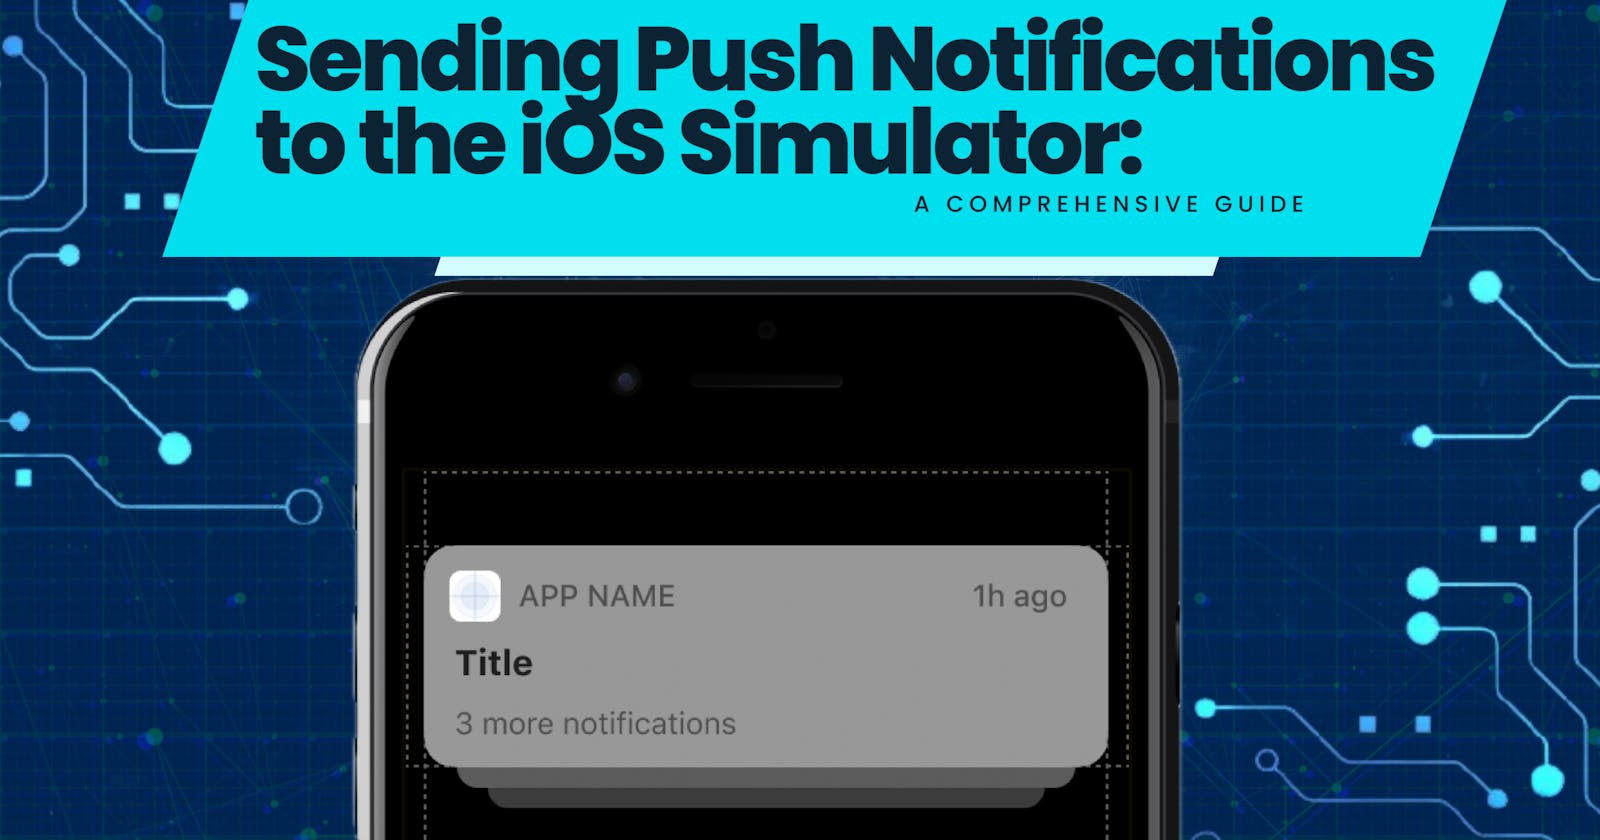 Sending Push Notifications to the iOS Simulator: A Comprehensive Guide